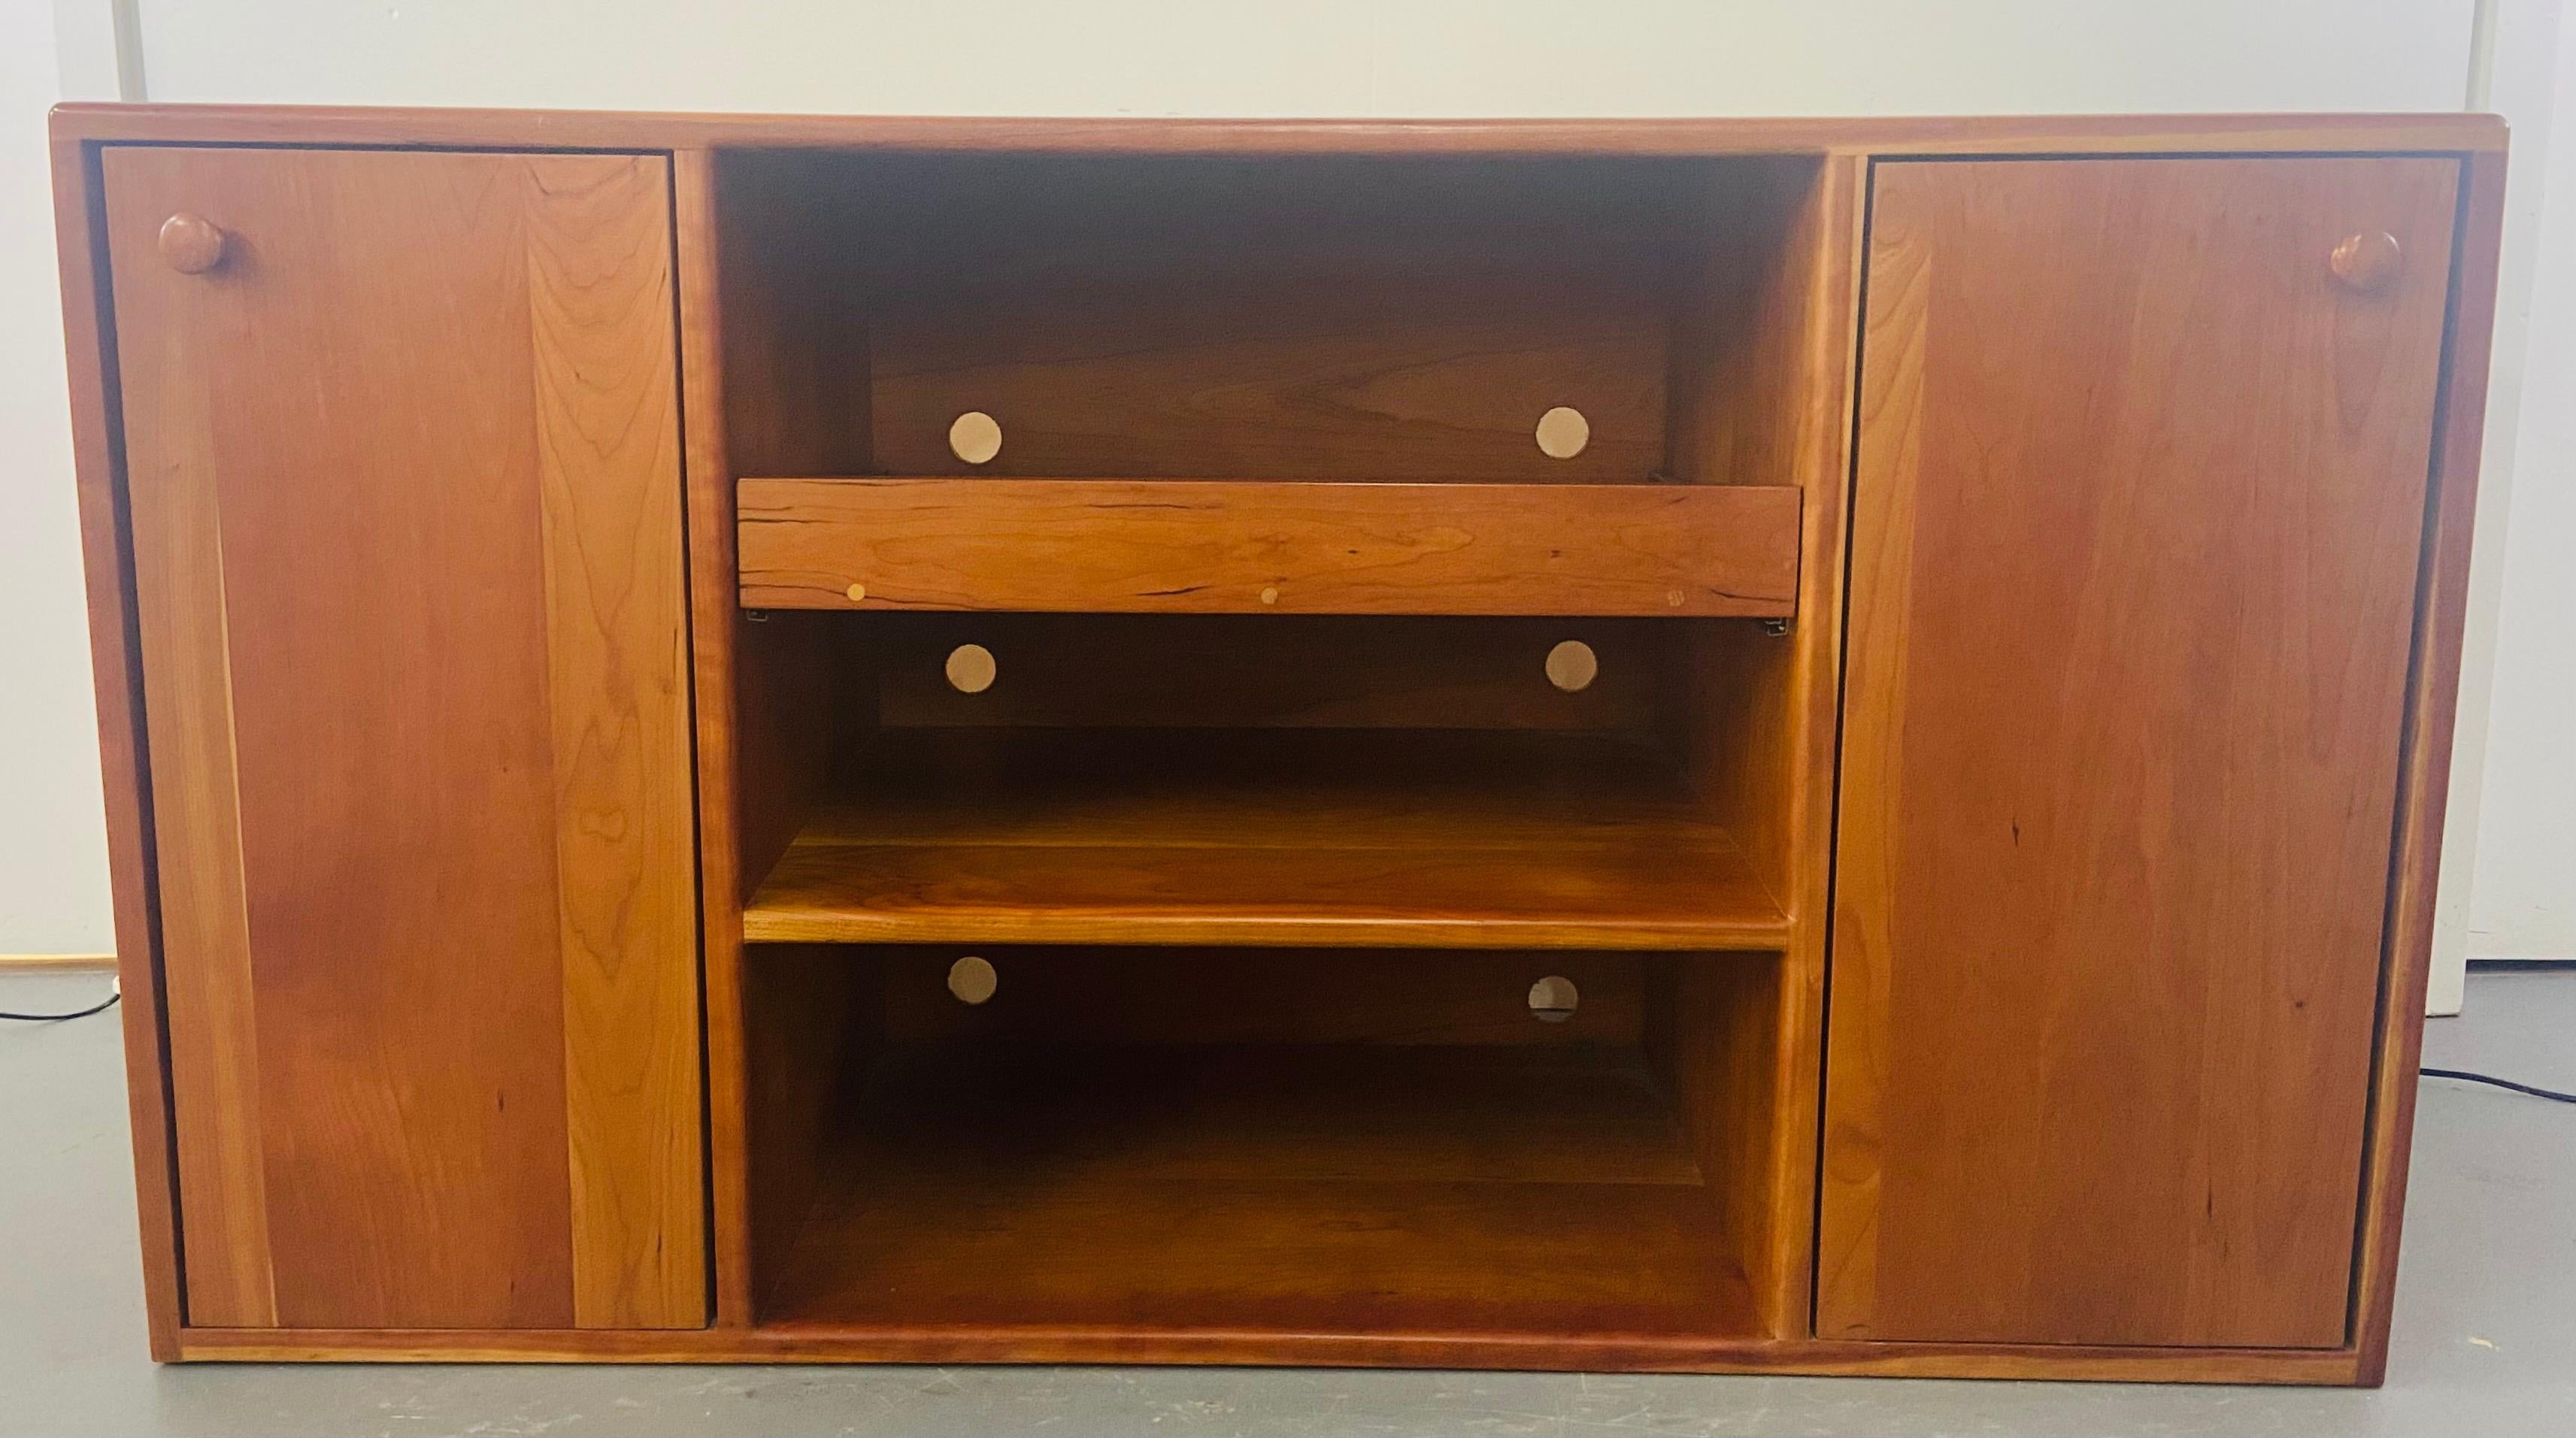 A rare Mid-Century Modern style custom made stereo cabinet by the quality hardwood furniture maker Pompanoosuc Mills in cherrywood. The cabinet provides multiple shelves units and 4our drawers for storage of music records and additional items.